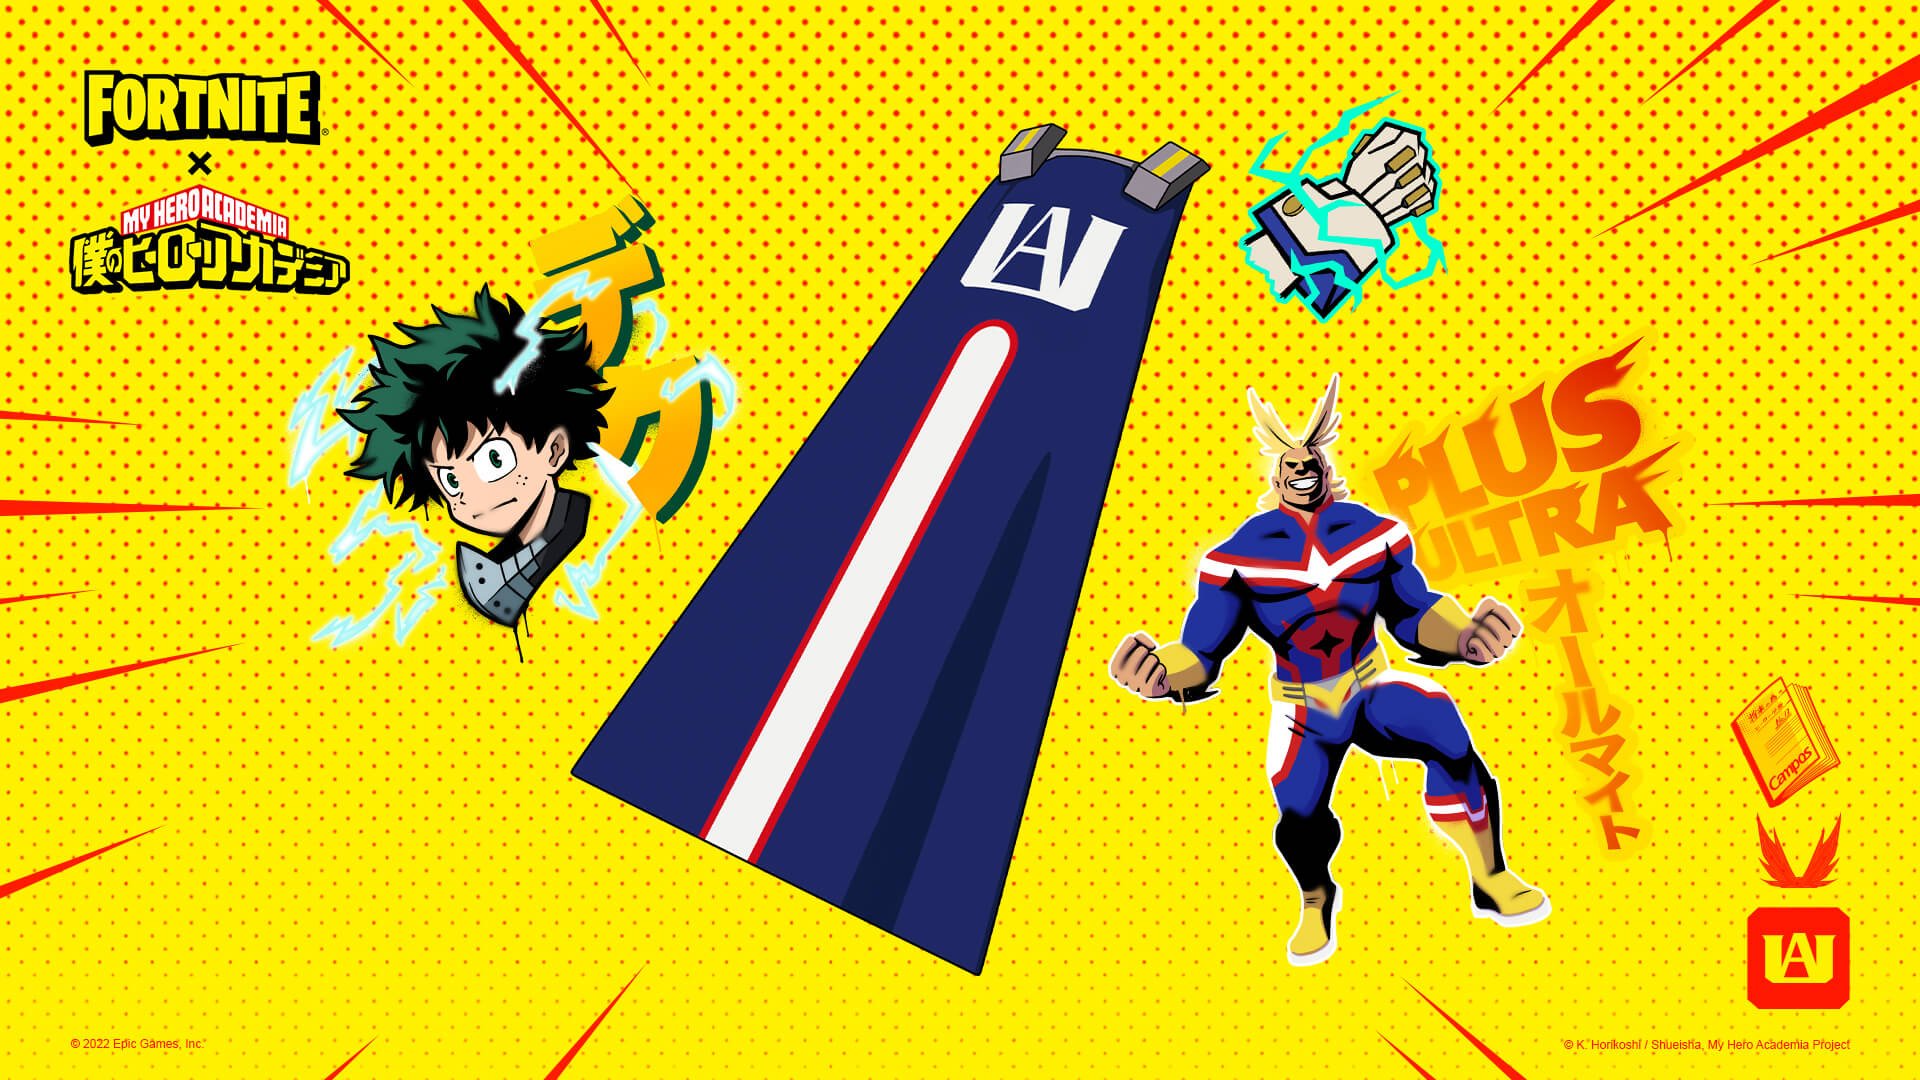 iFireMonkey on X: Starting now, check out the new limited-time My Hero  Academia Quests in Battle Royale/Zero Build and the Hero Training Gym  island (island code: 6917-7775-5190). Complete the Quests before December